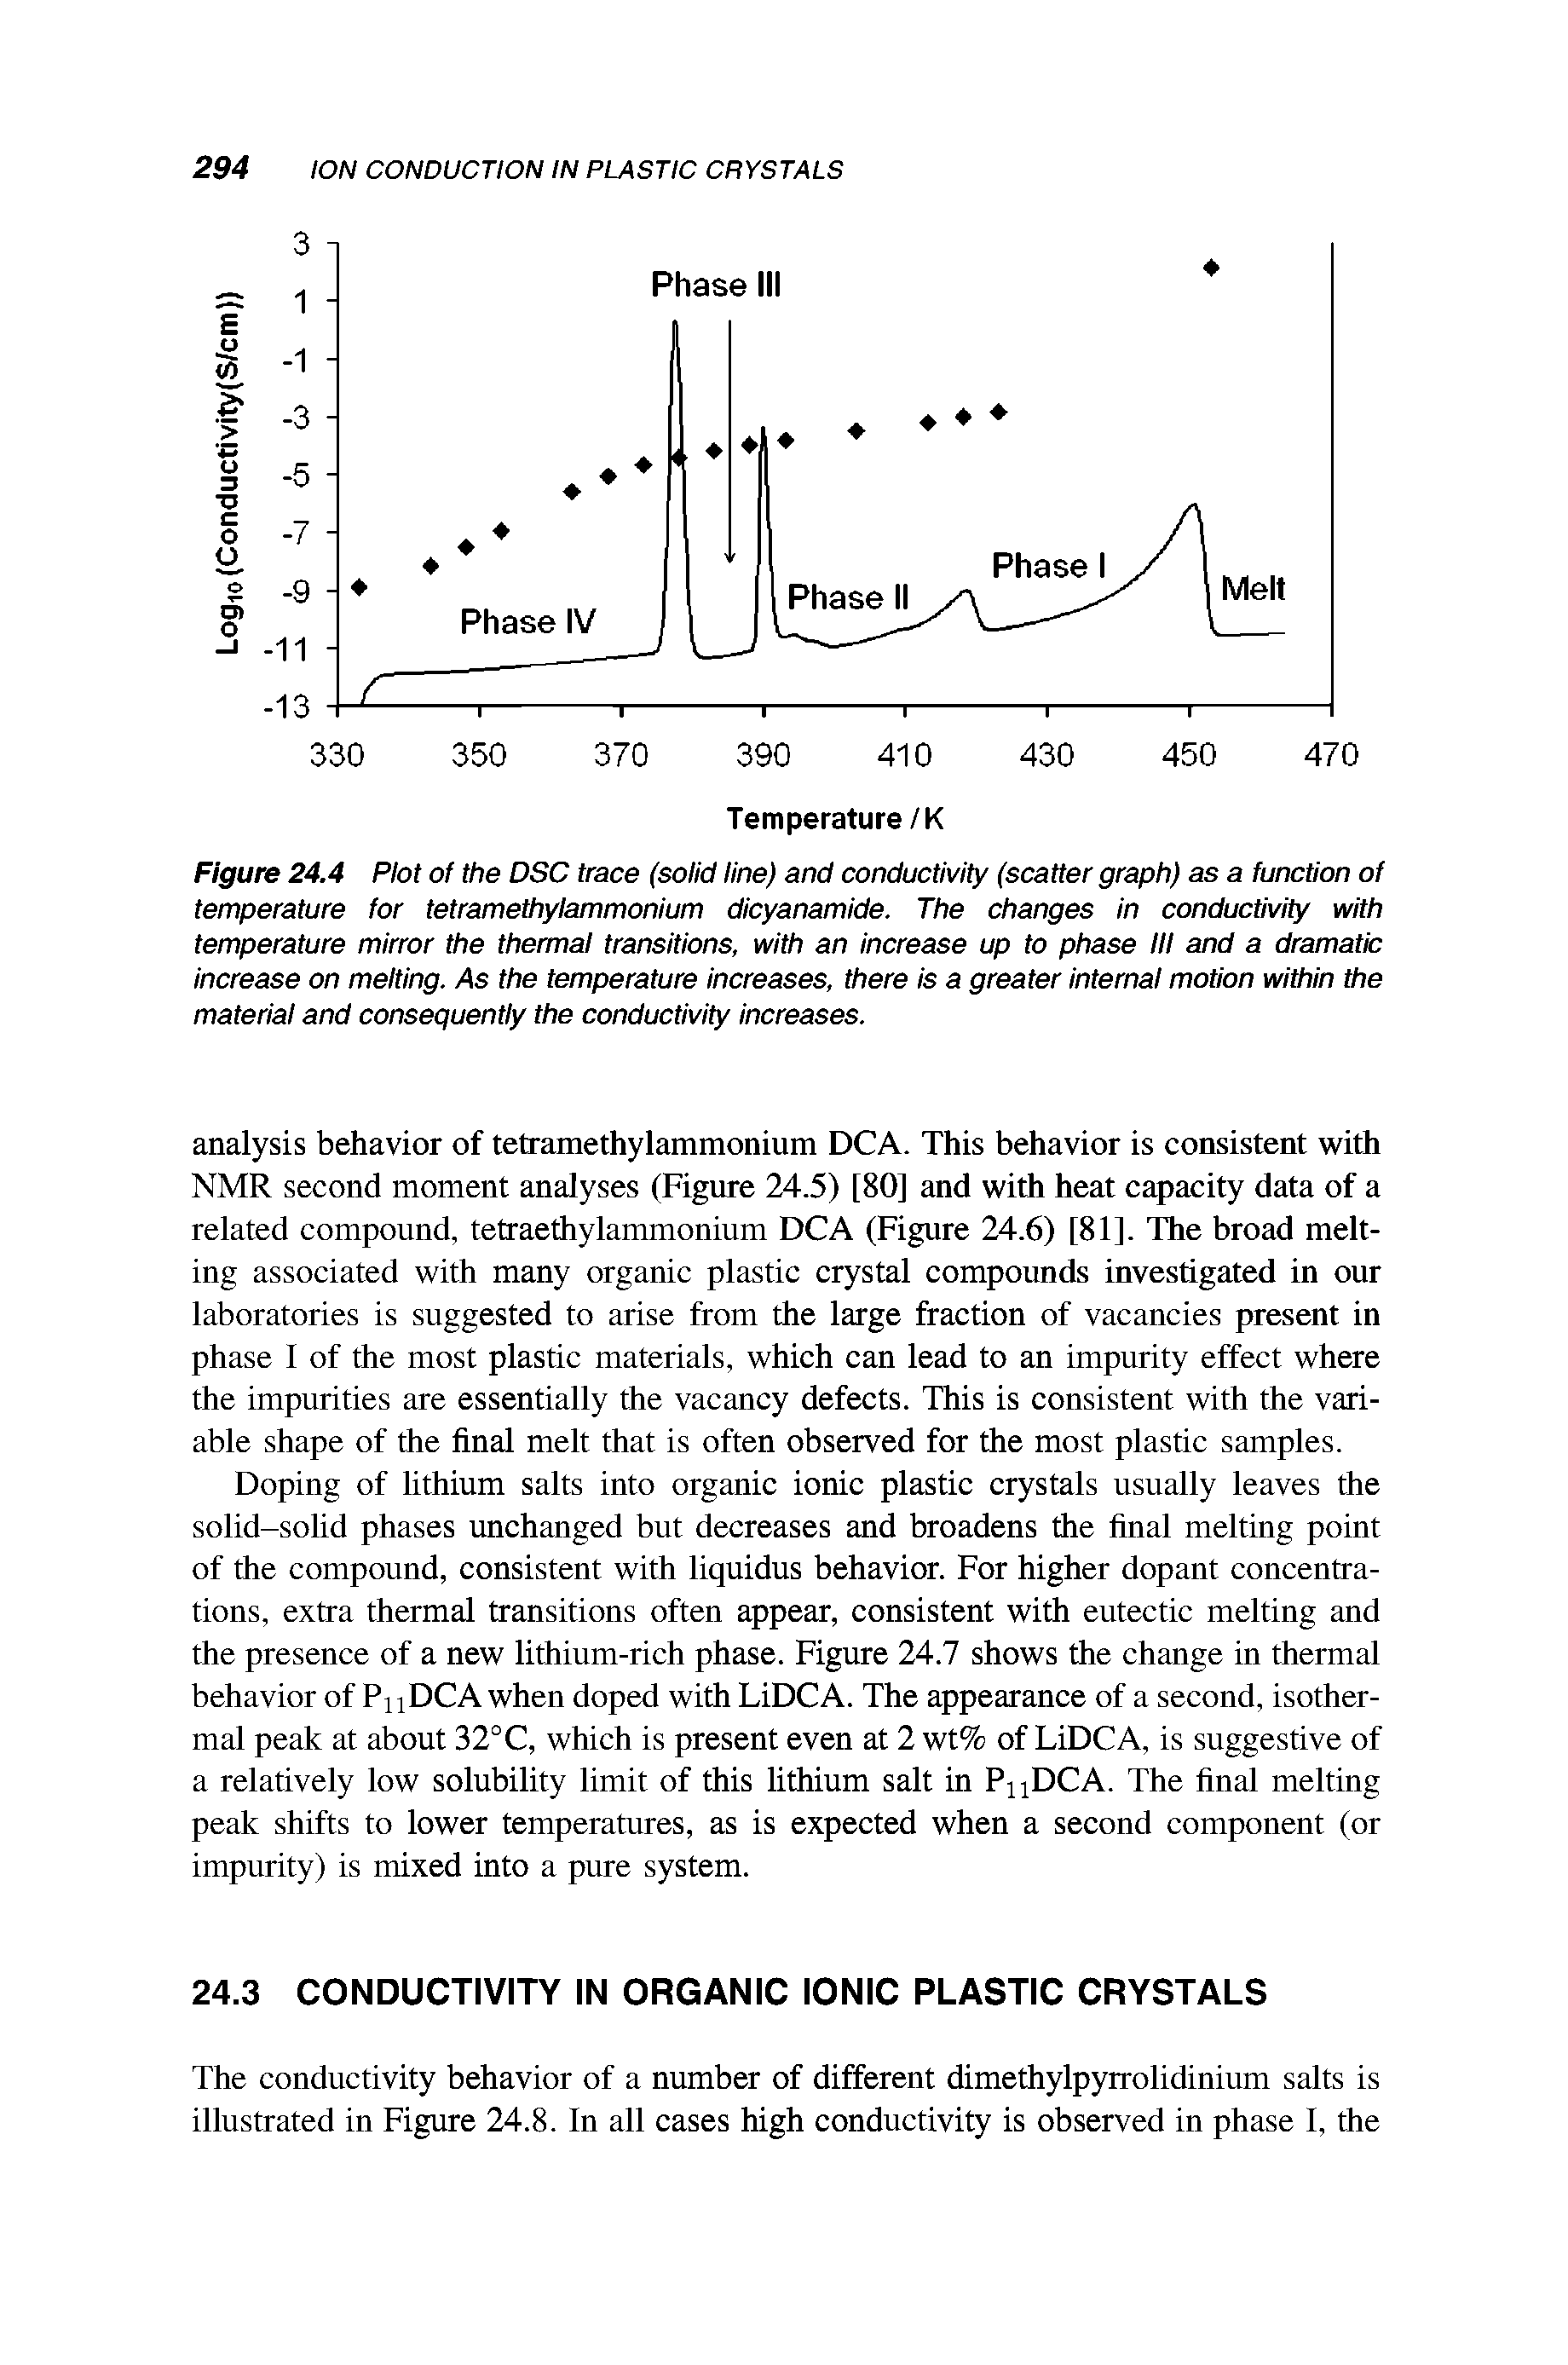 Figure 24.4 Plot of the DSC trace (solid line) and conductivity (scatter graph) as a function of temperature for tetramethyleimmonium dicyanamide. The changes in conductivity with temperature mirror the thermal transitions, with an increase up to phase III and a dramatic increase on melting. As the temperature increases, there is a greater internal motion within the material and consequently the conductivity increases.